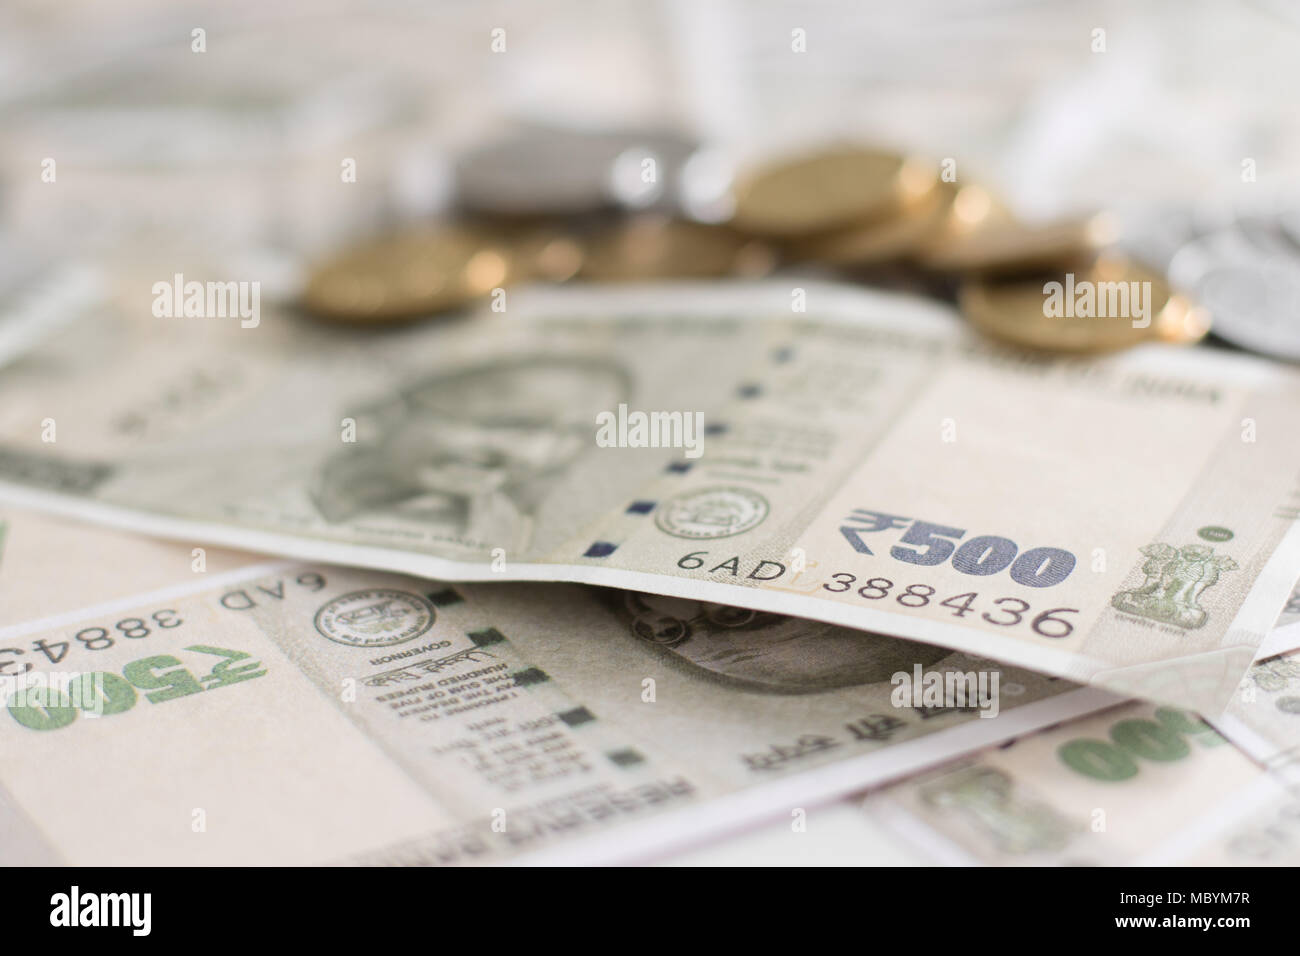 Indian currency Stock Photo